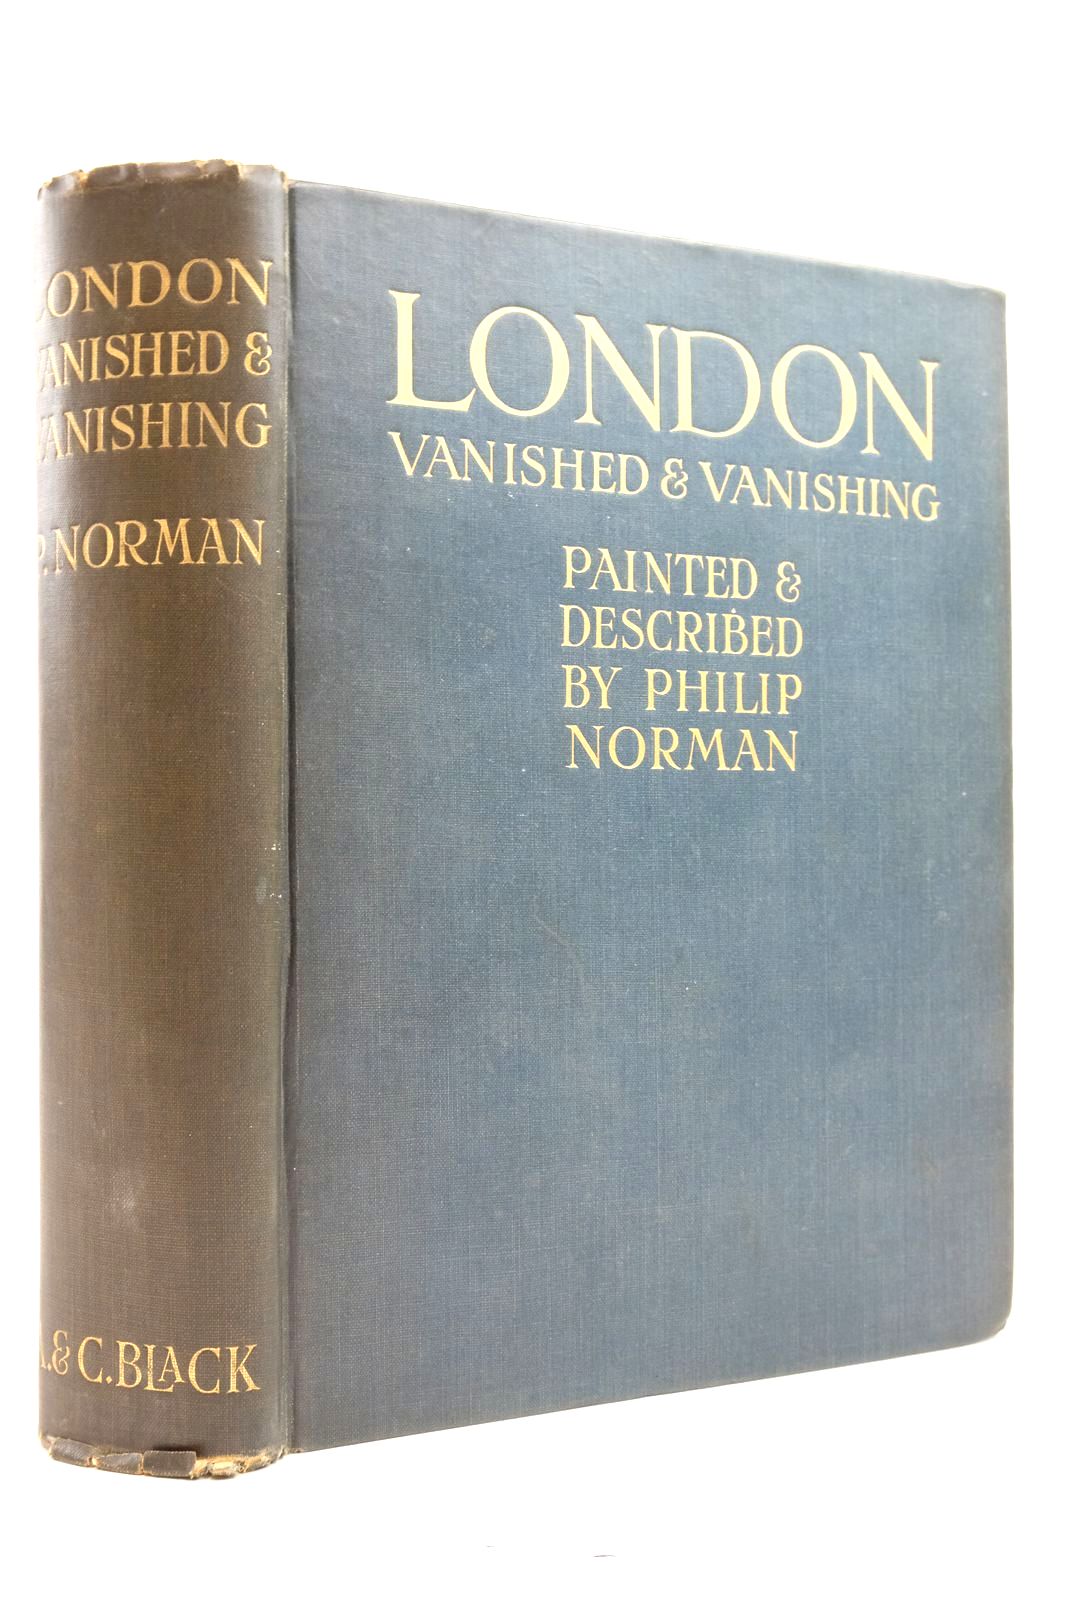 Photo of LONDON VANISHED & VANISHING written by Norman, Philip illustrated by Norman, Philip published by Adam & Charles Black (STOCK CODE: 2137238)  for sale by Stella & Rose's Books